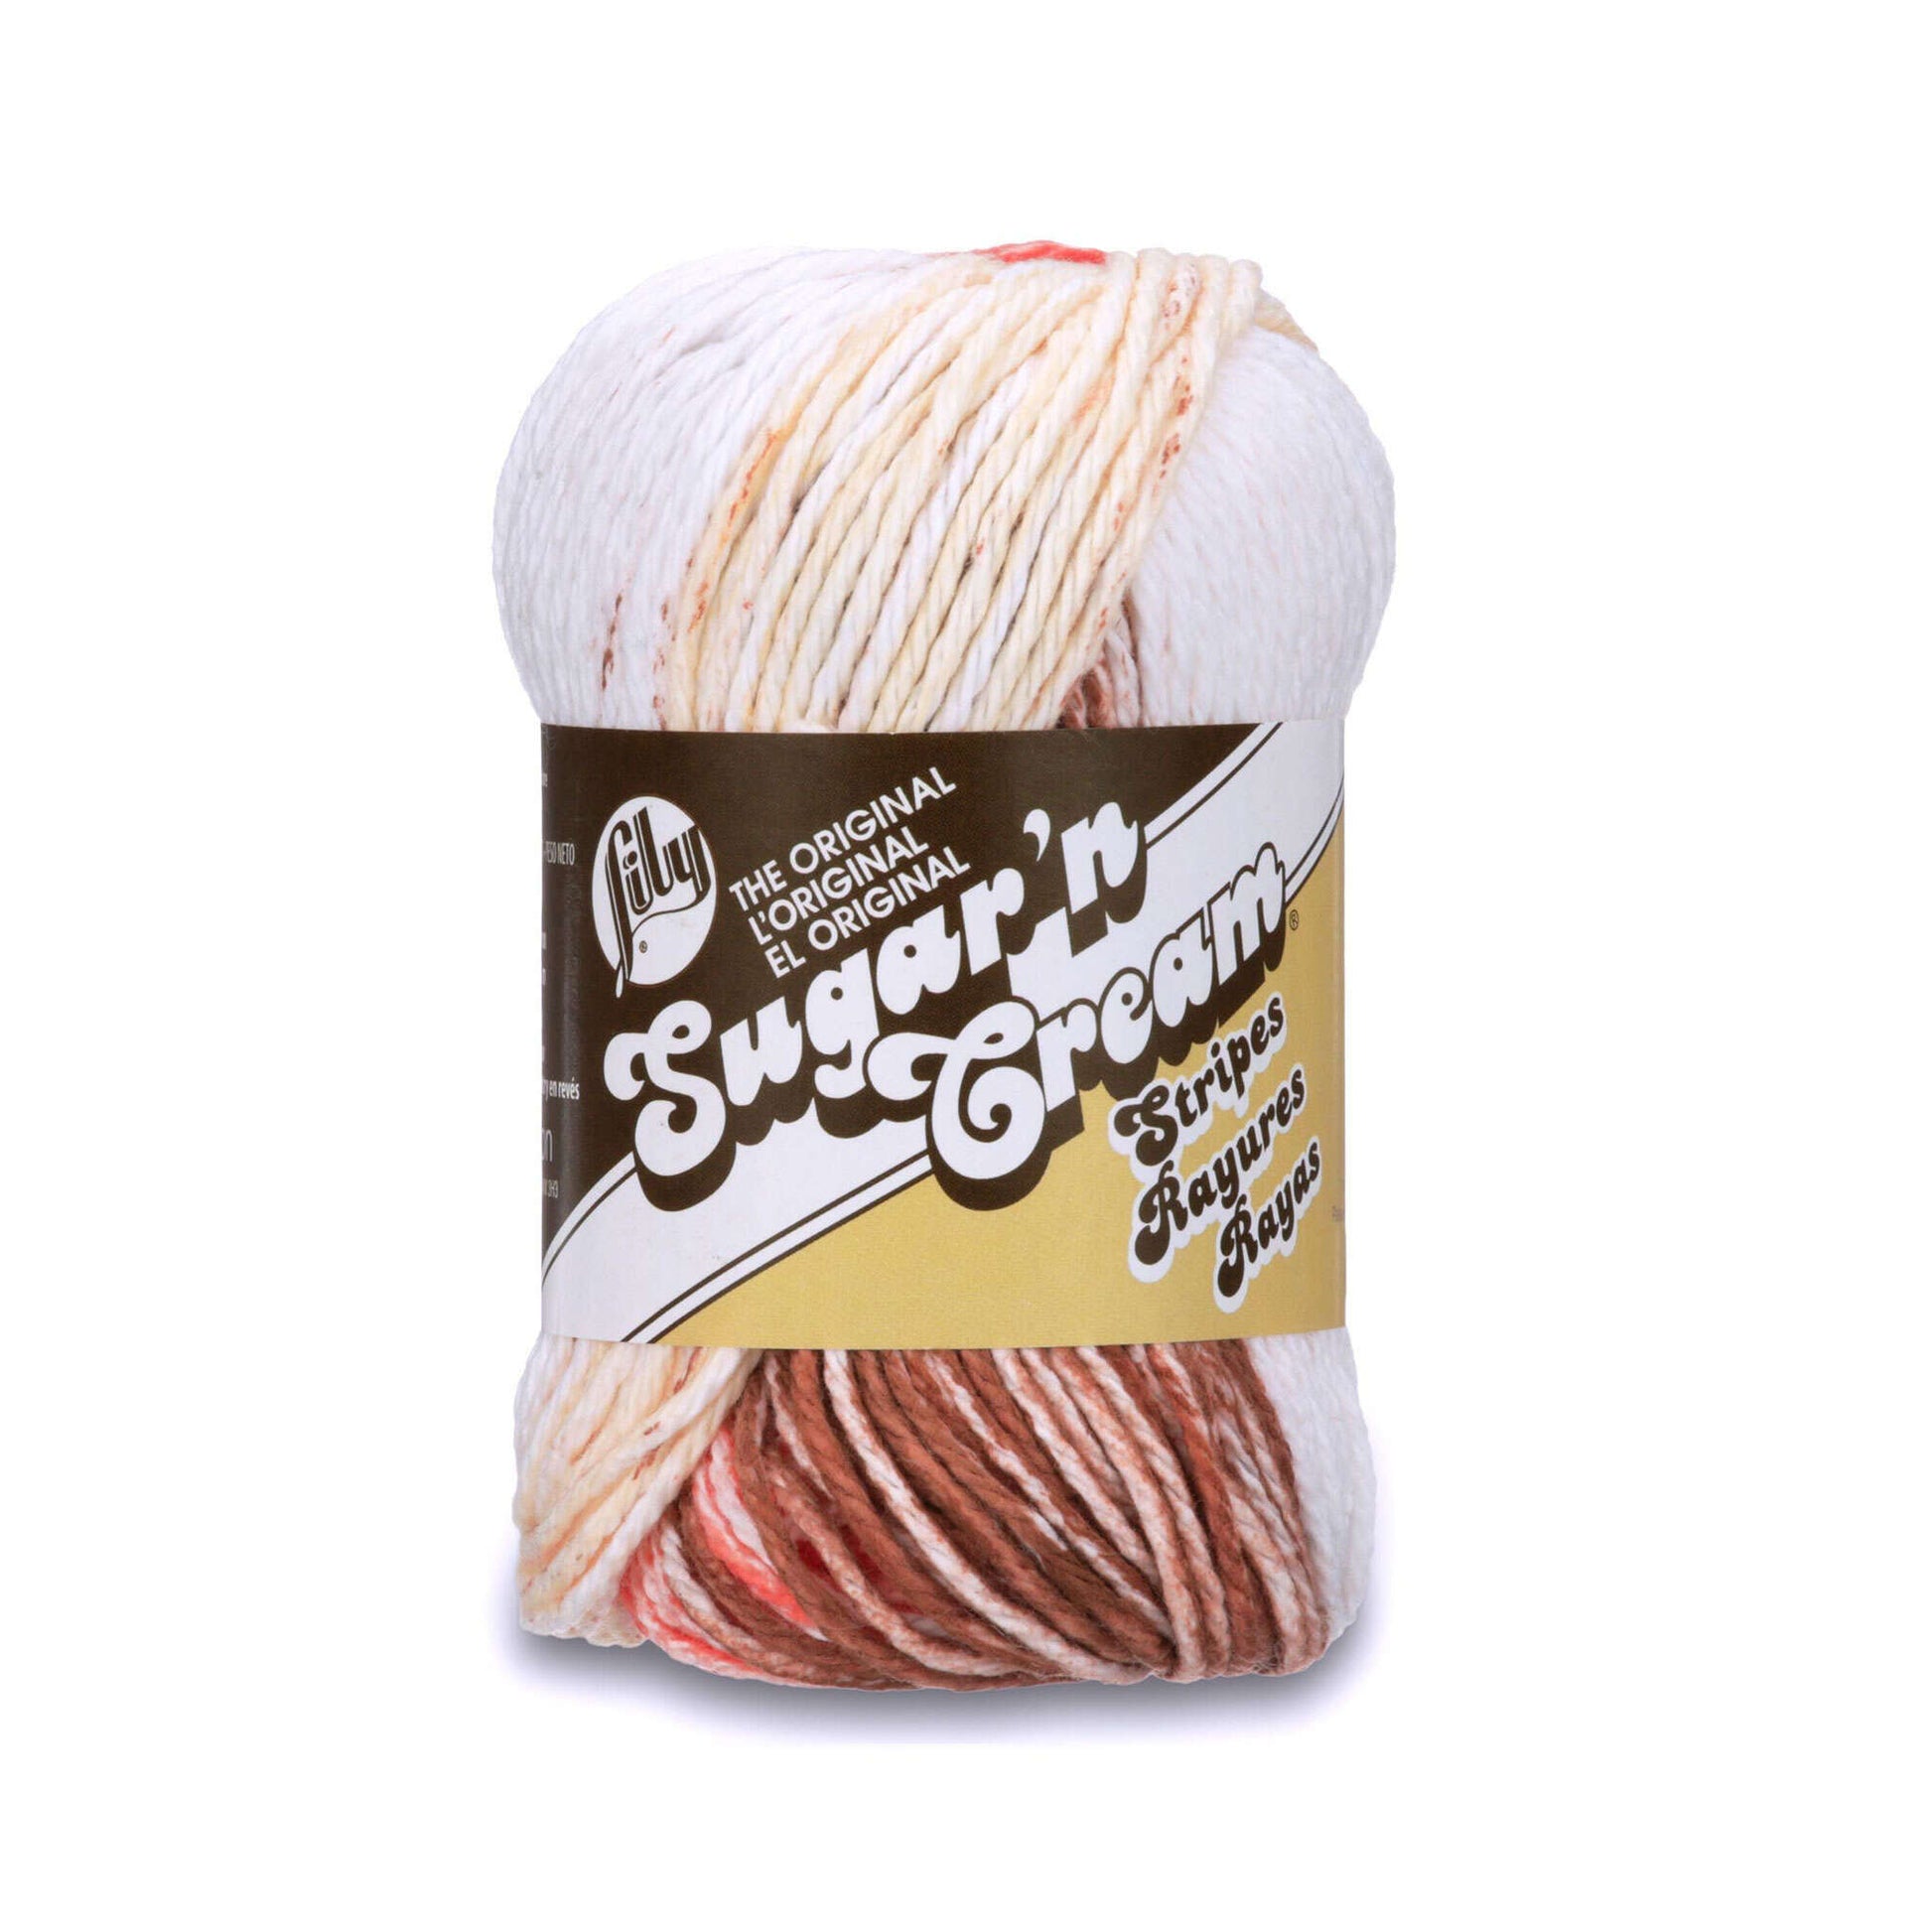  Lily Sugar and Cream Cotton Yarn, Country Stripes